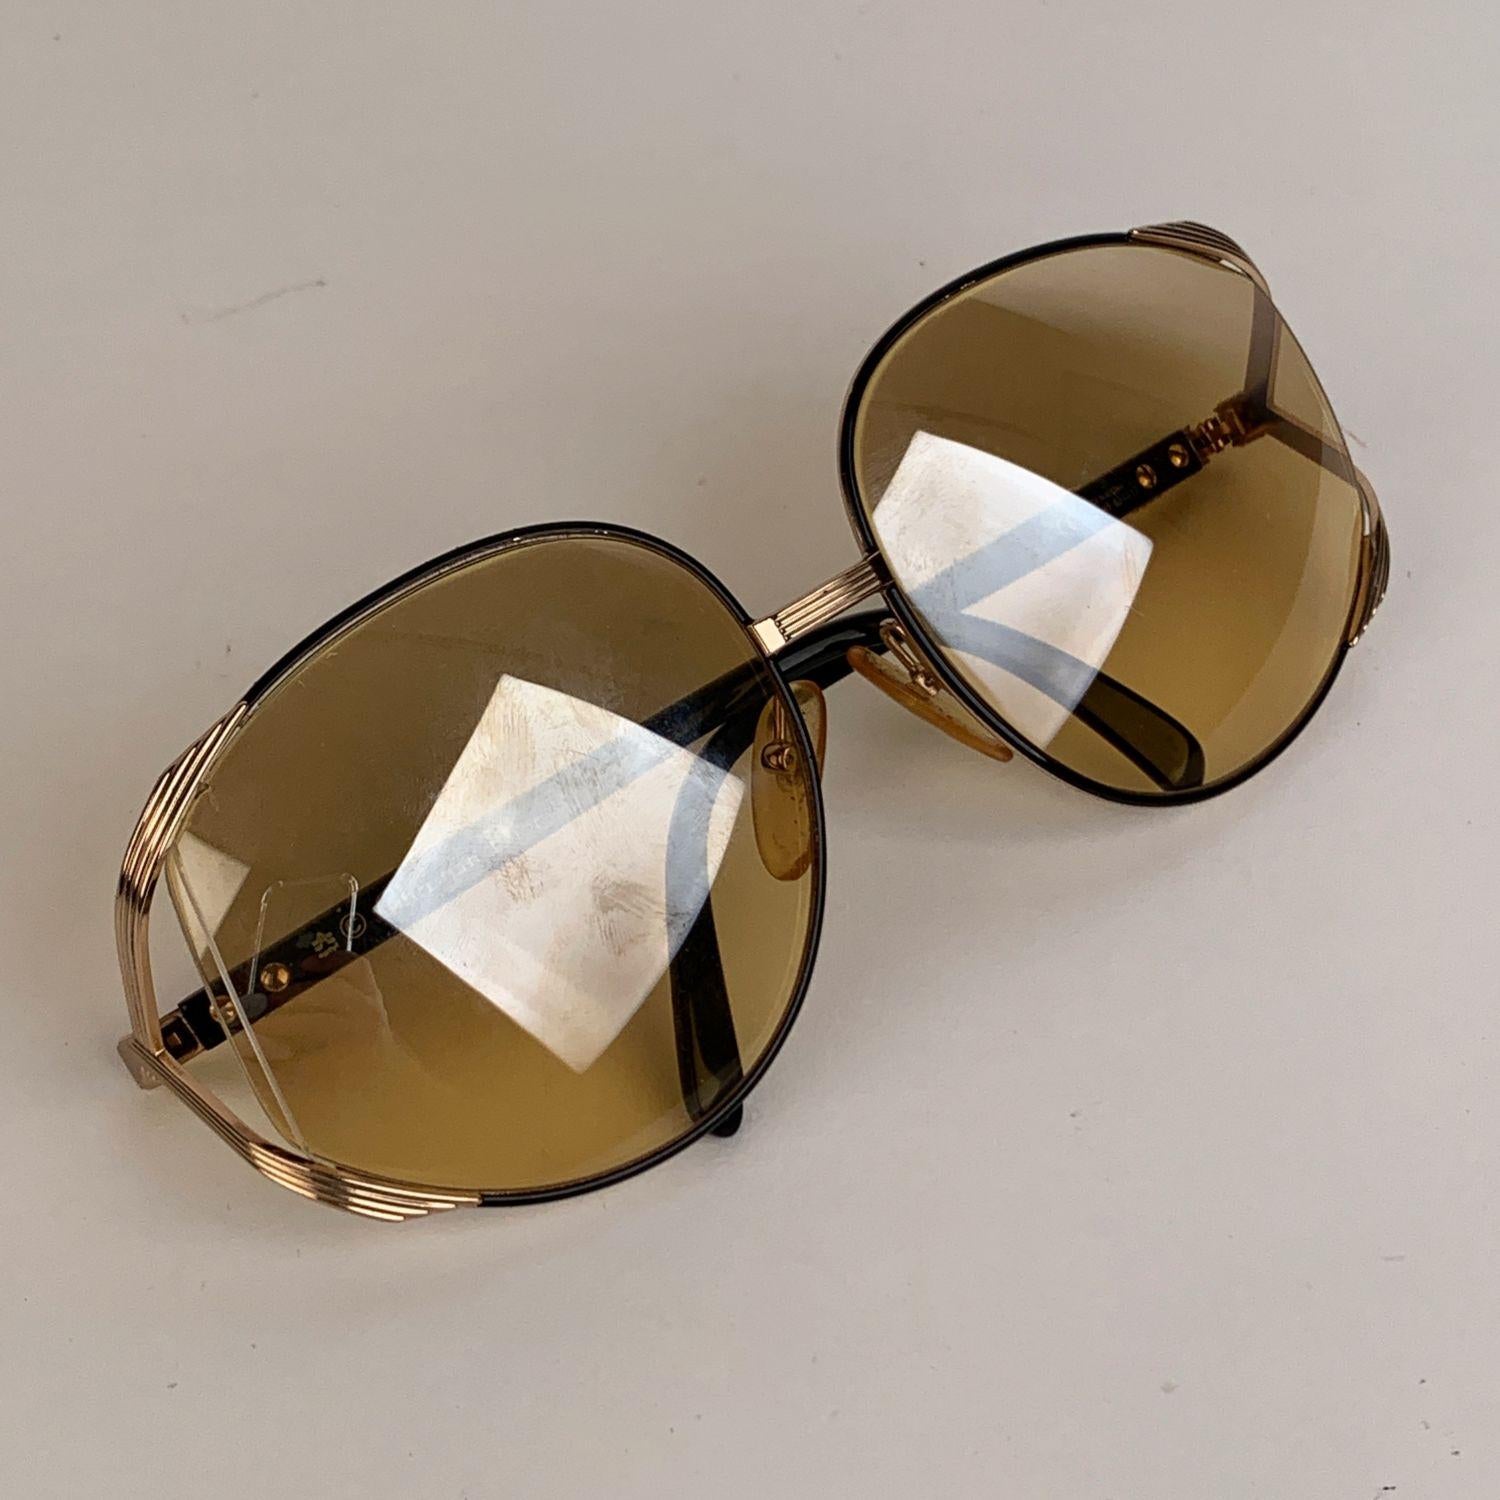 CHRISTIAN DIOR Vintage 1980s gold metal oversized sunglasses with black accents. Yellow new lenses. Black acetate arms. Handmade in Germany. CD logo on temples. Mod. & Refs: 2250 - 48 - 63/17




Details

MATERIAL: Metal

COLOR: Black

MODEL: